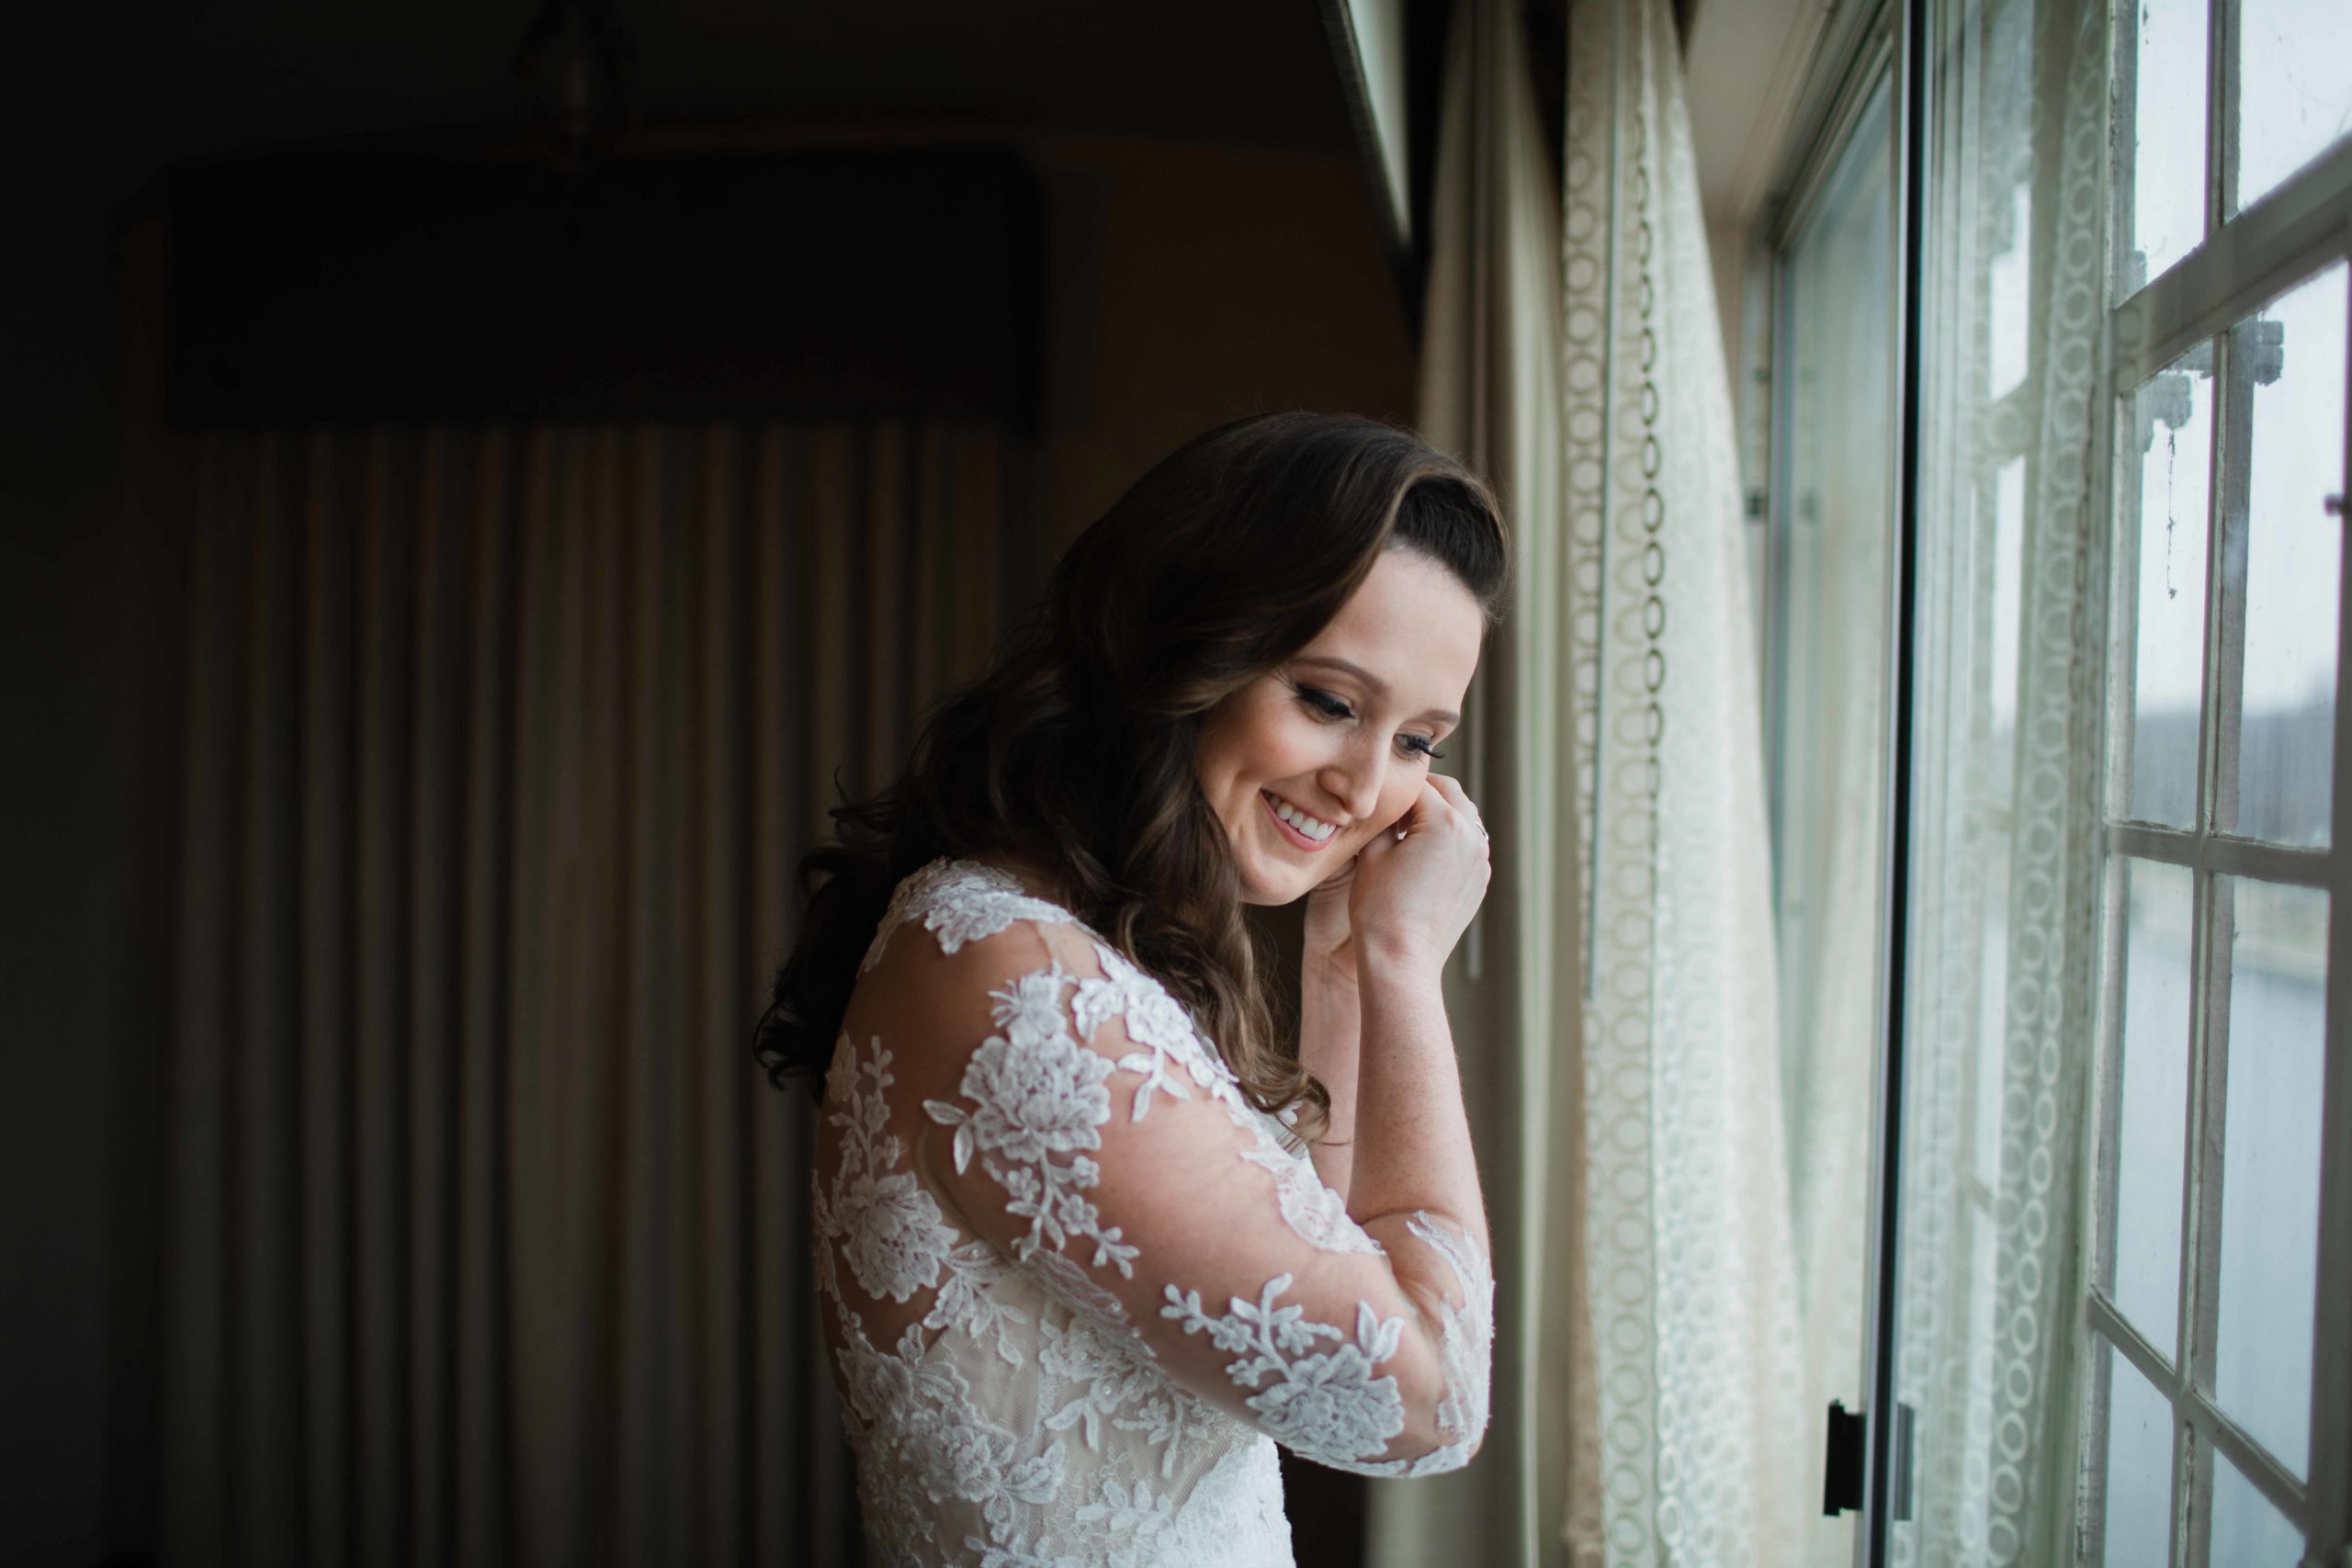 Hotel Baker Winter Wedding Photography Saint Charles Illinois Bride Getting Ready by Window